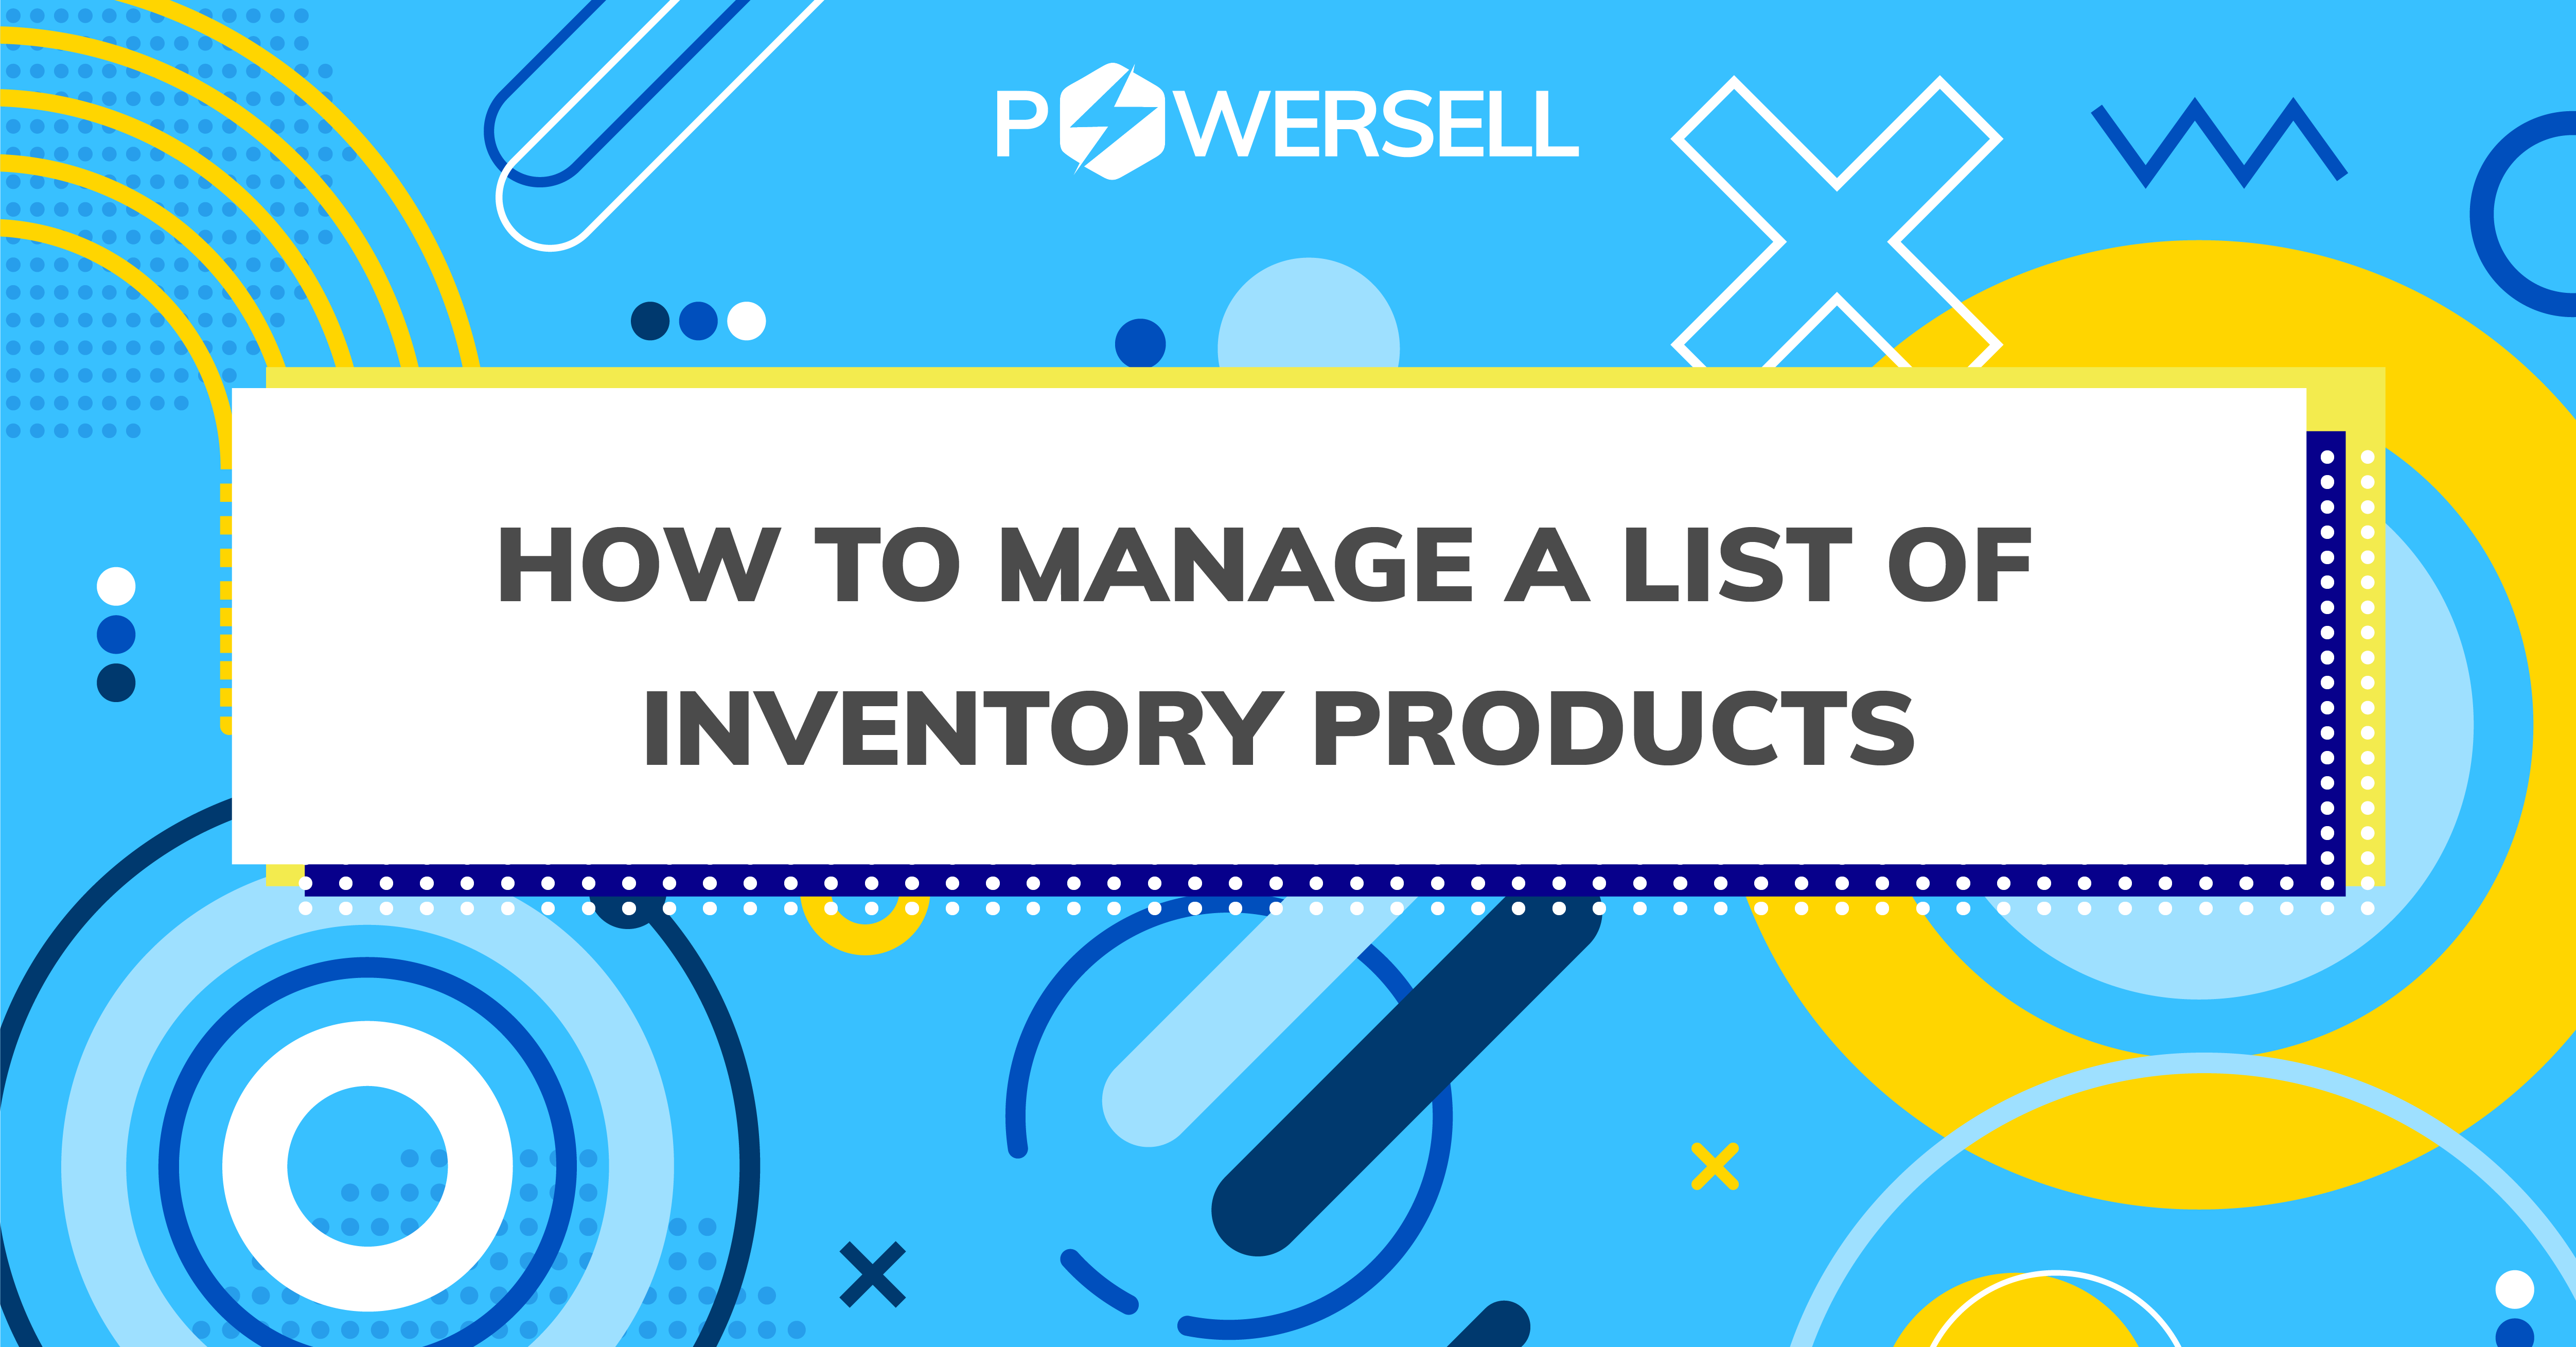 HOW TO MANAGE A LIST OF INVENTORY PRODUCTS